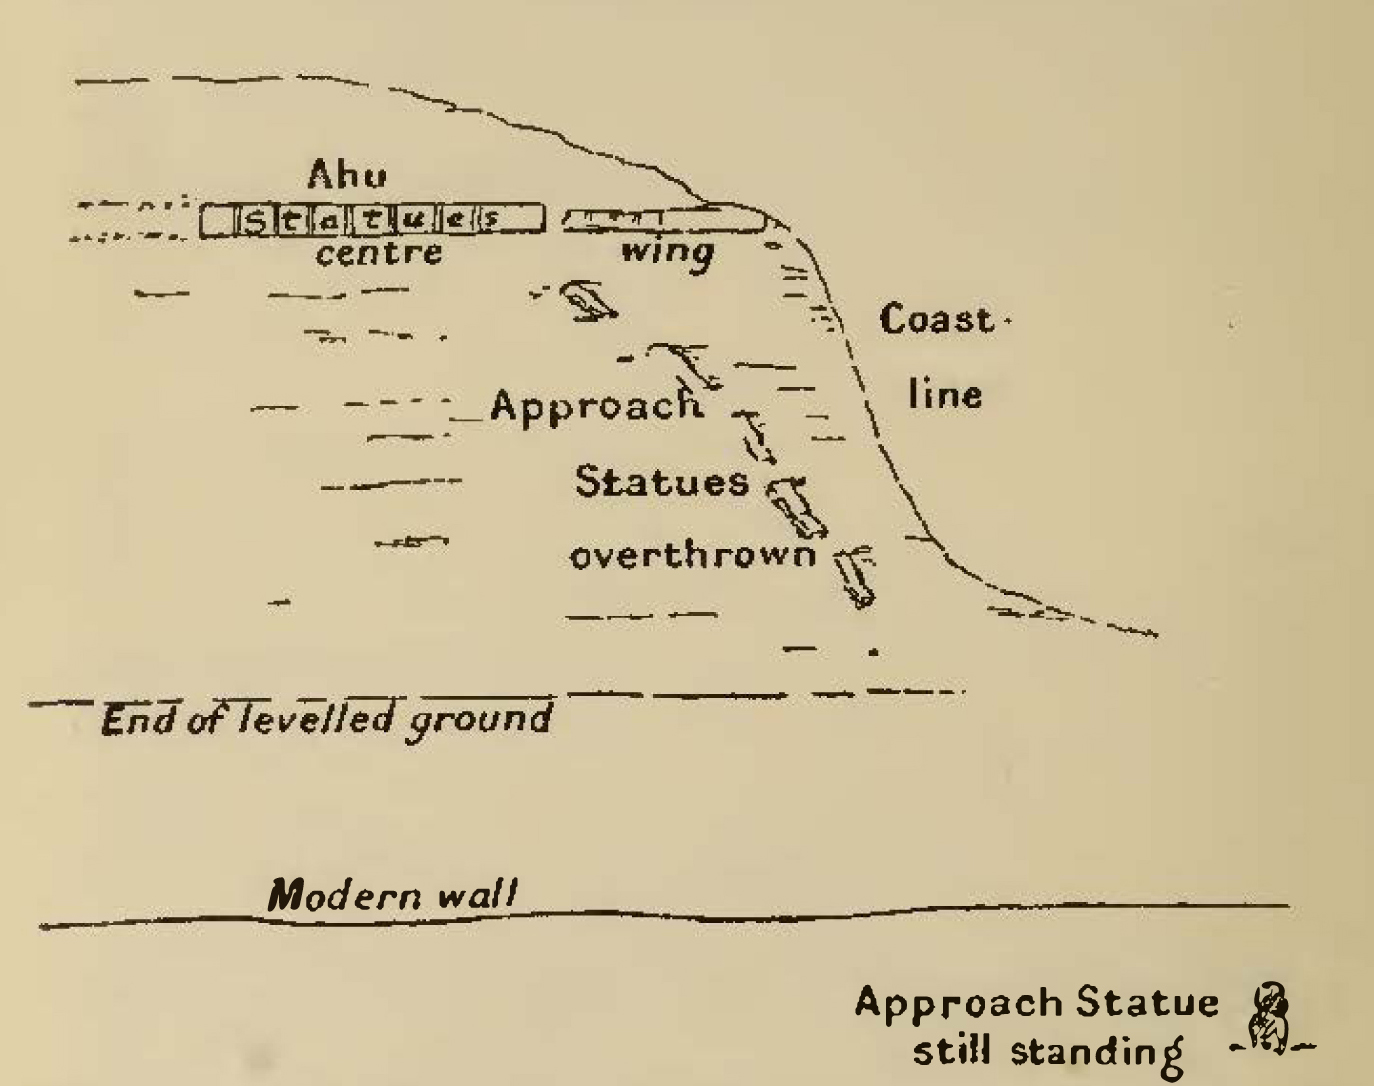 diagram showing locations of statues near the coast